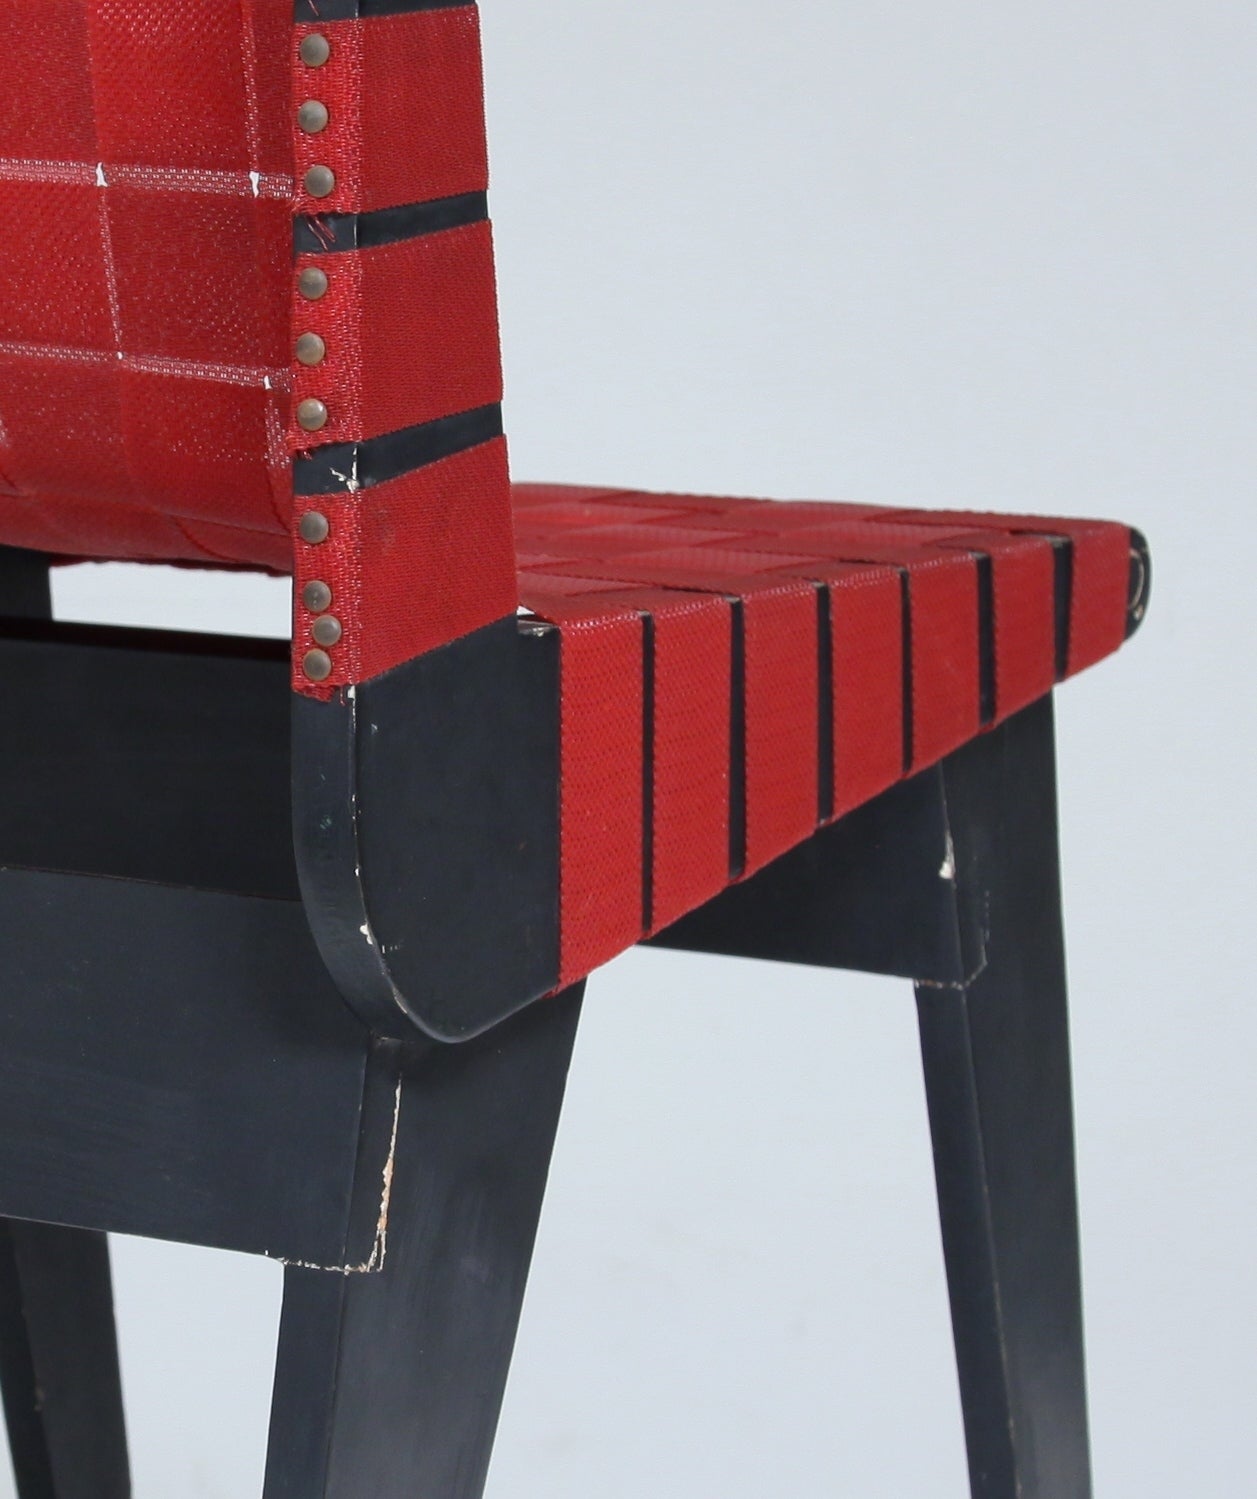 A black wooden chair with red cotton webbing from the 1950s, made by Bauhaus-trained Klaus Grabe.

Klaus Grabe left Germany in the 1930s for Mexico. Here Grabe worked together with fellow Bauhaus student Michael van Beuren and Morley Webb. This